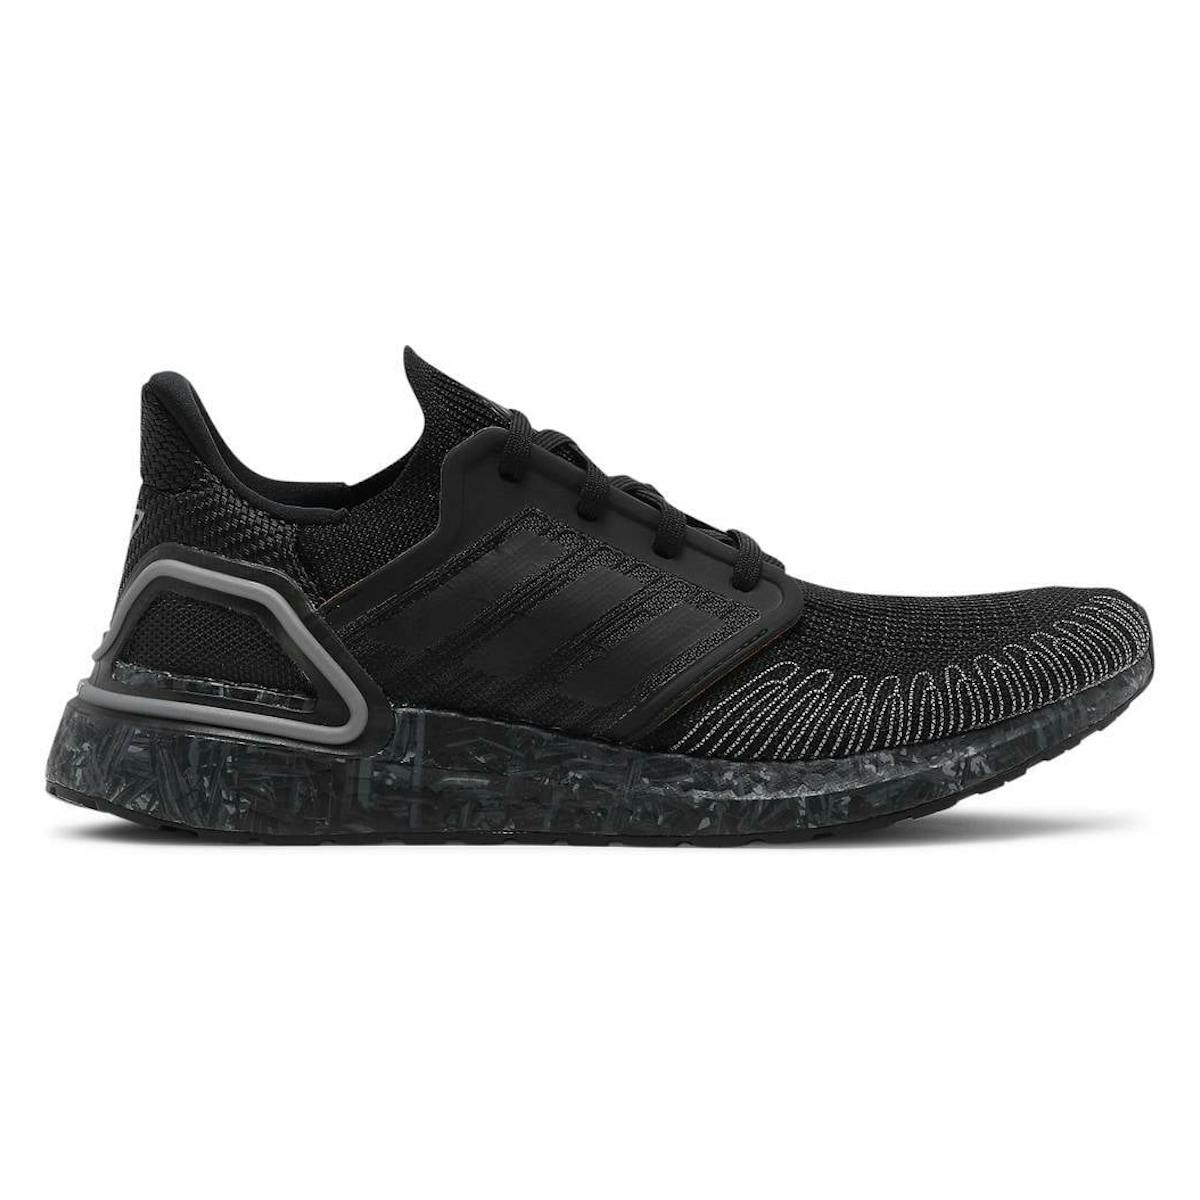 James Bond x Adidas UltraBoost 20 "No Time To Die - Core Black"